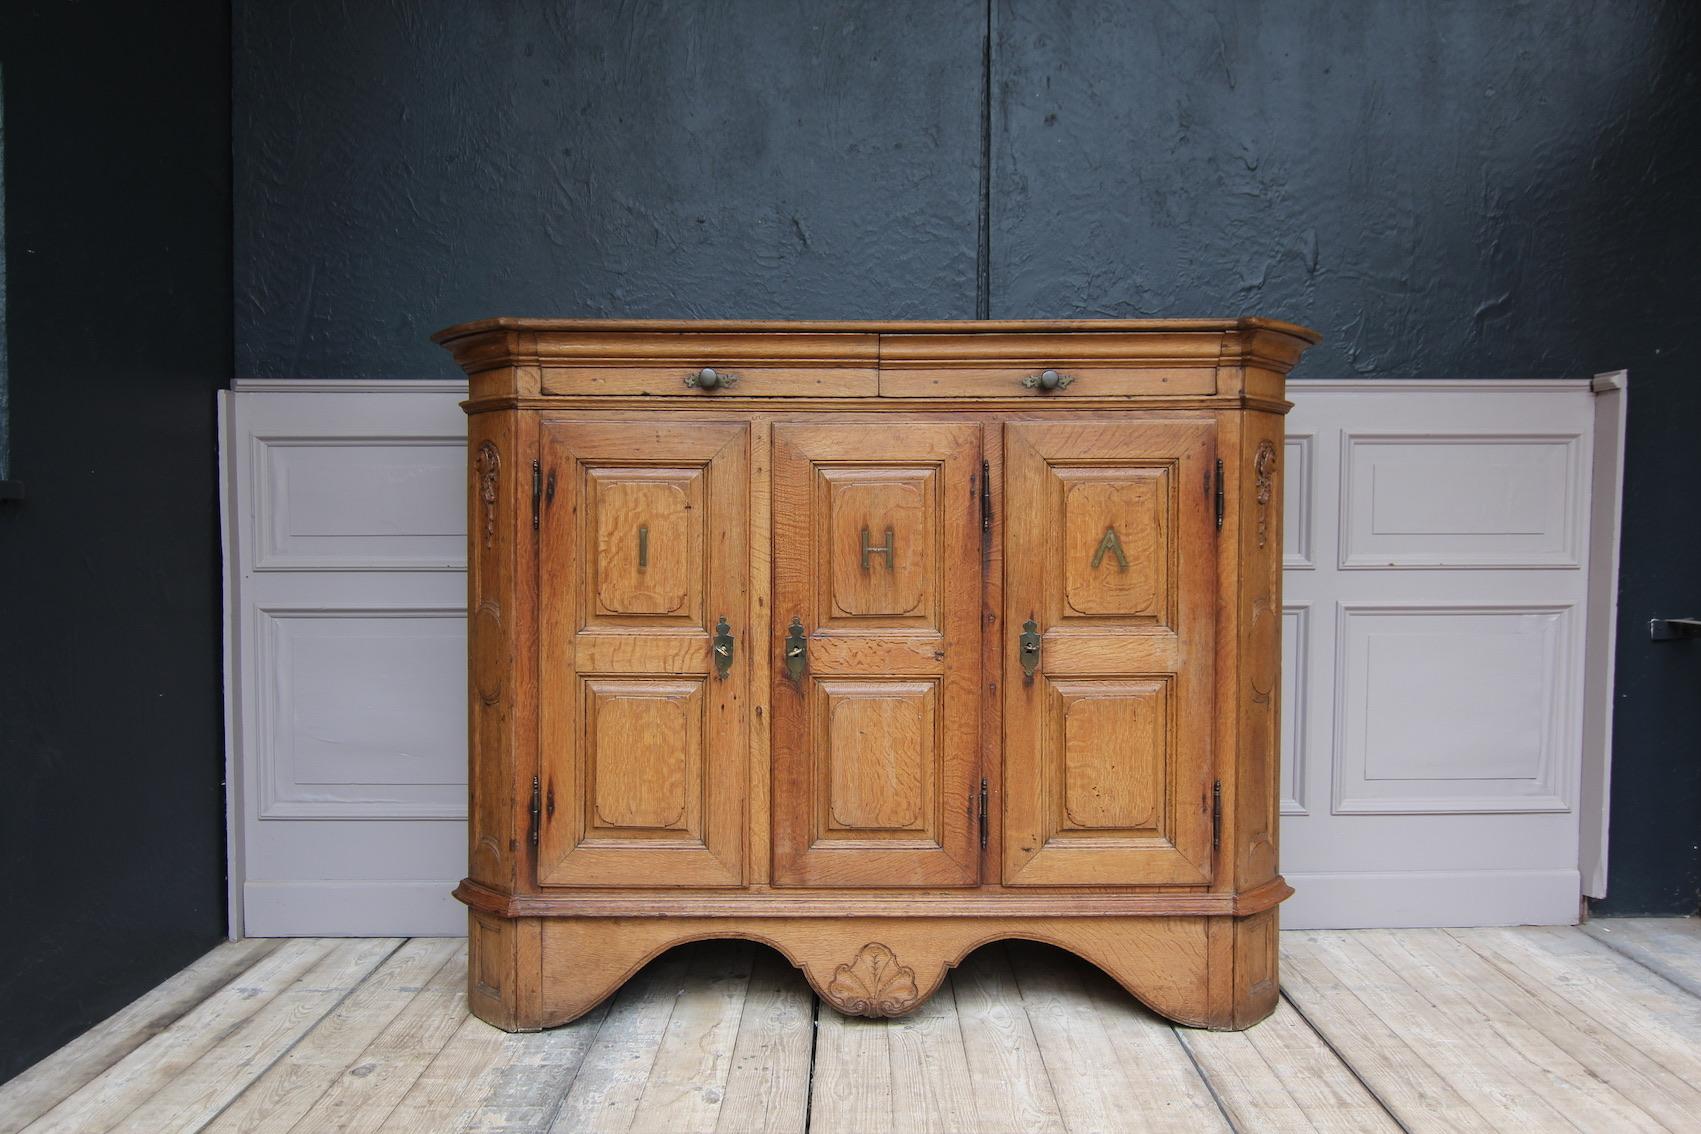 Hand-Carved 18th Century German Baroque Cupboard or Sideboard Made of Oak